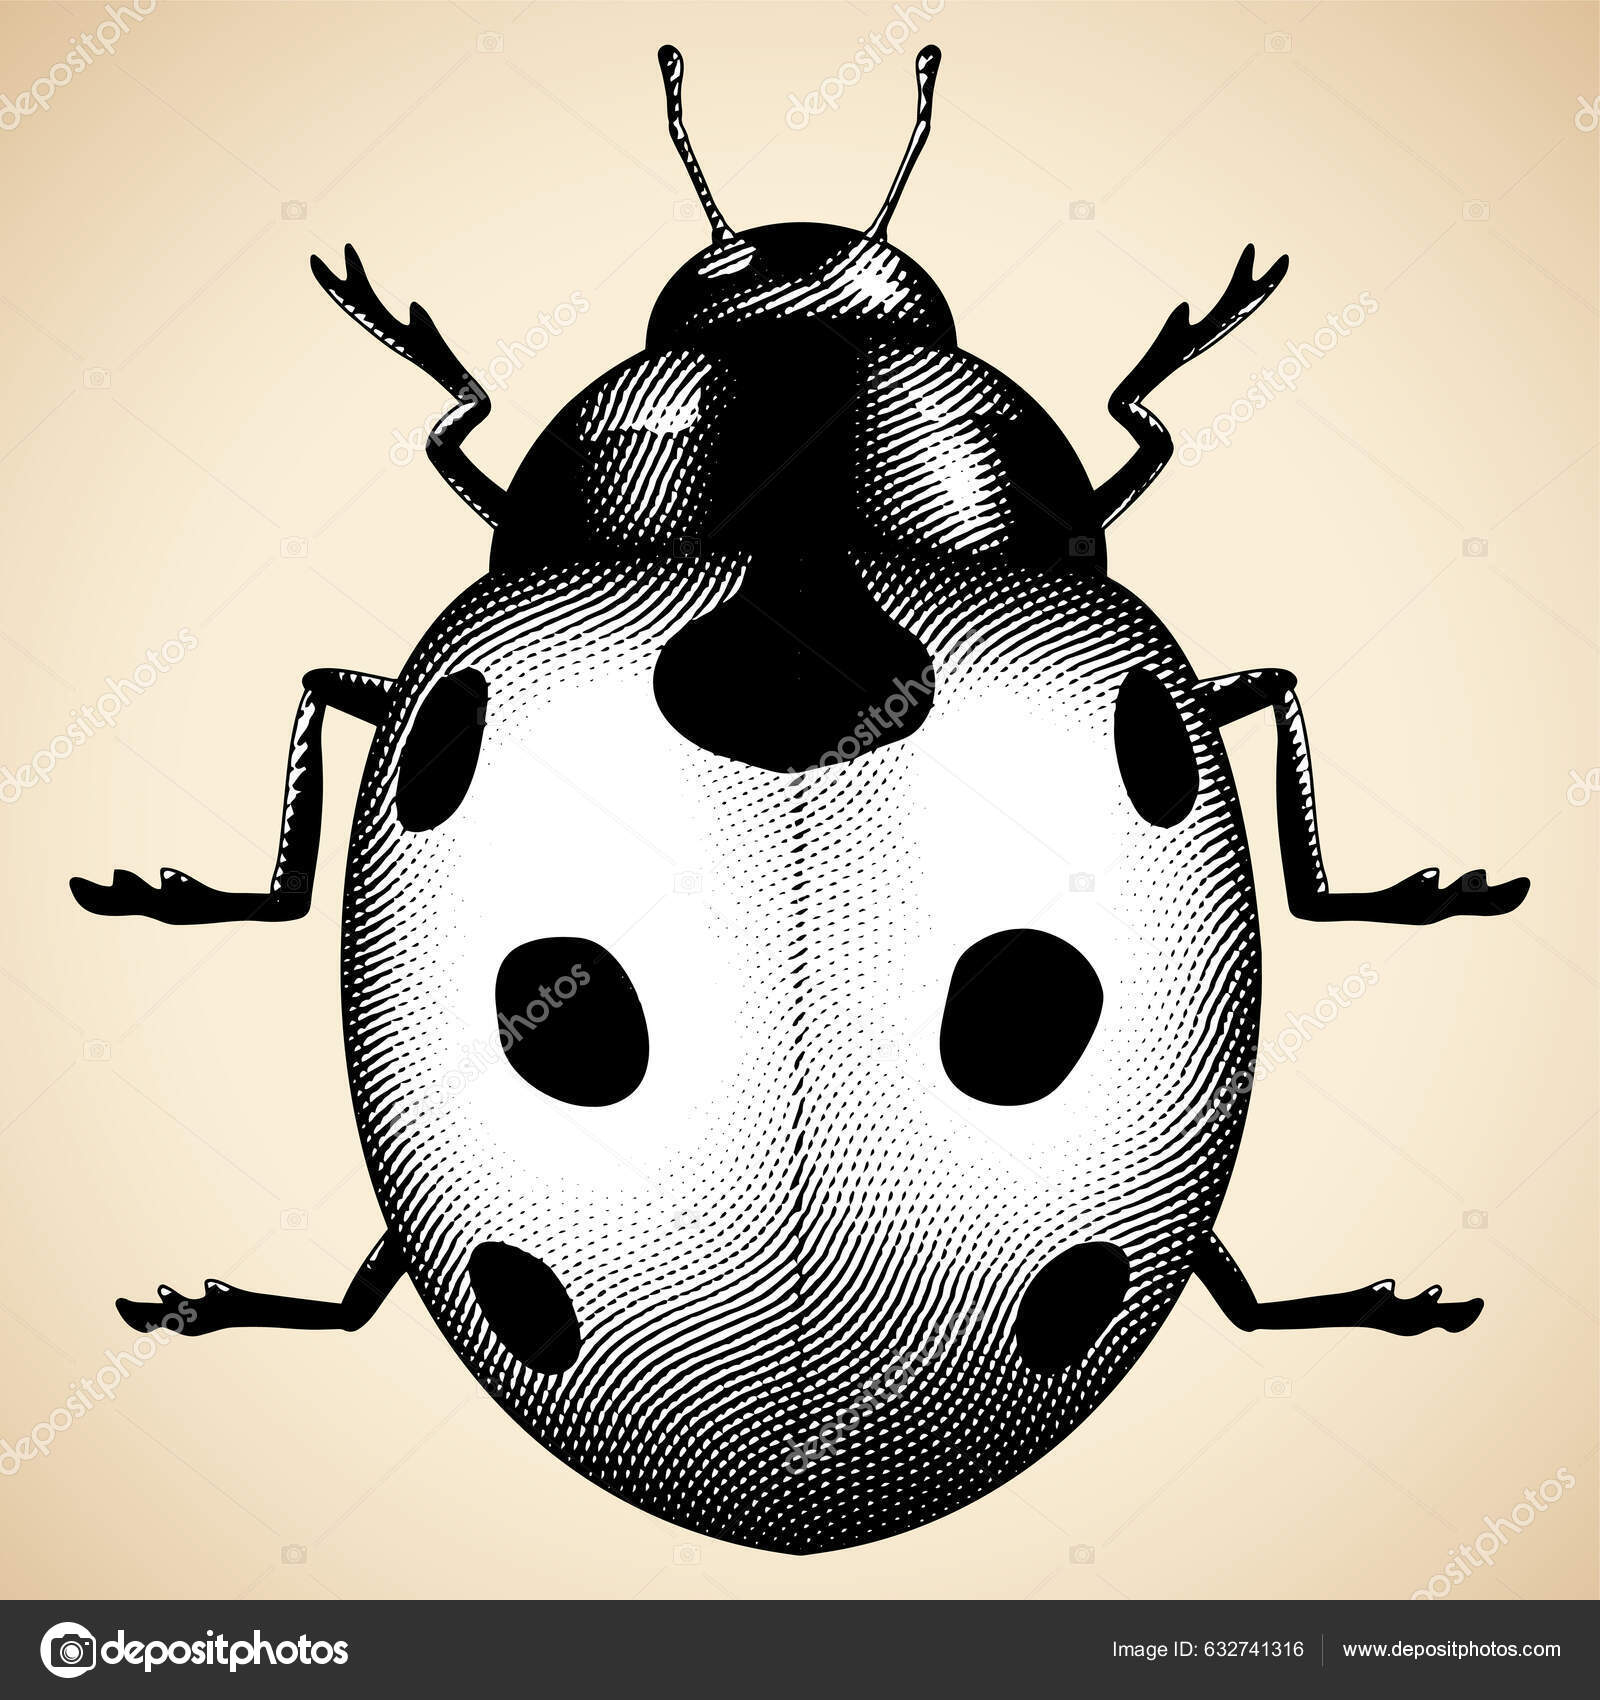 Learn How to Draw a Ladybug in This Step by Step Tutorial